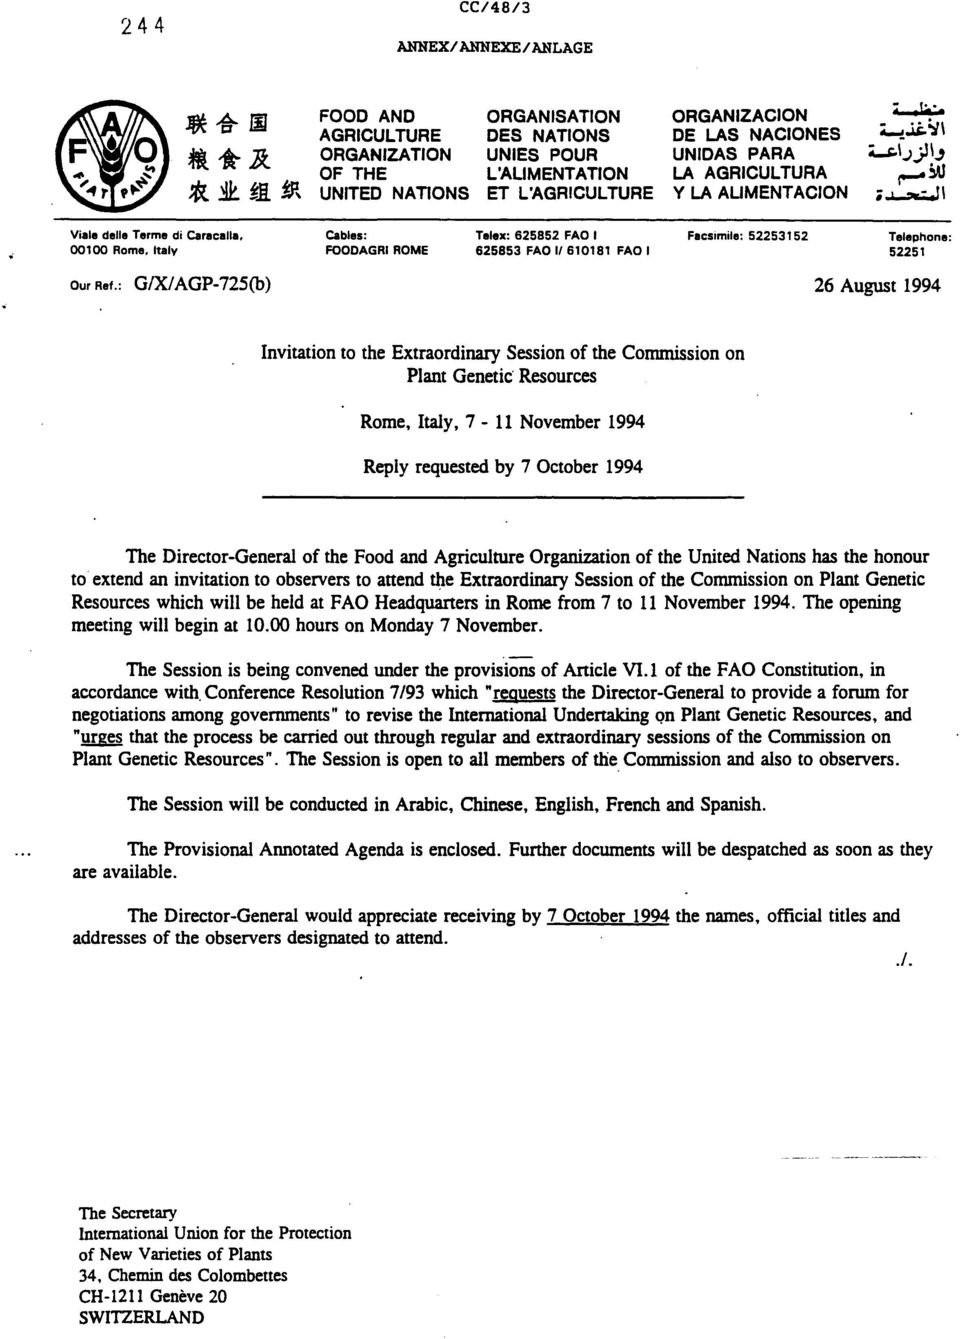 : G/X/ AGP-725(b) 26 August 1994 Invitation to the Extraordinary Session of the Commission on Plant Genetic Resources Rome, Italy, 7-11 November 1994 Reply requested by 7 October 1994 The